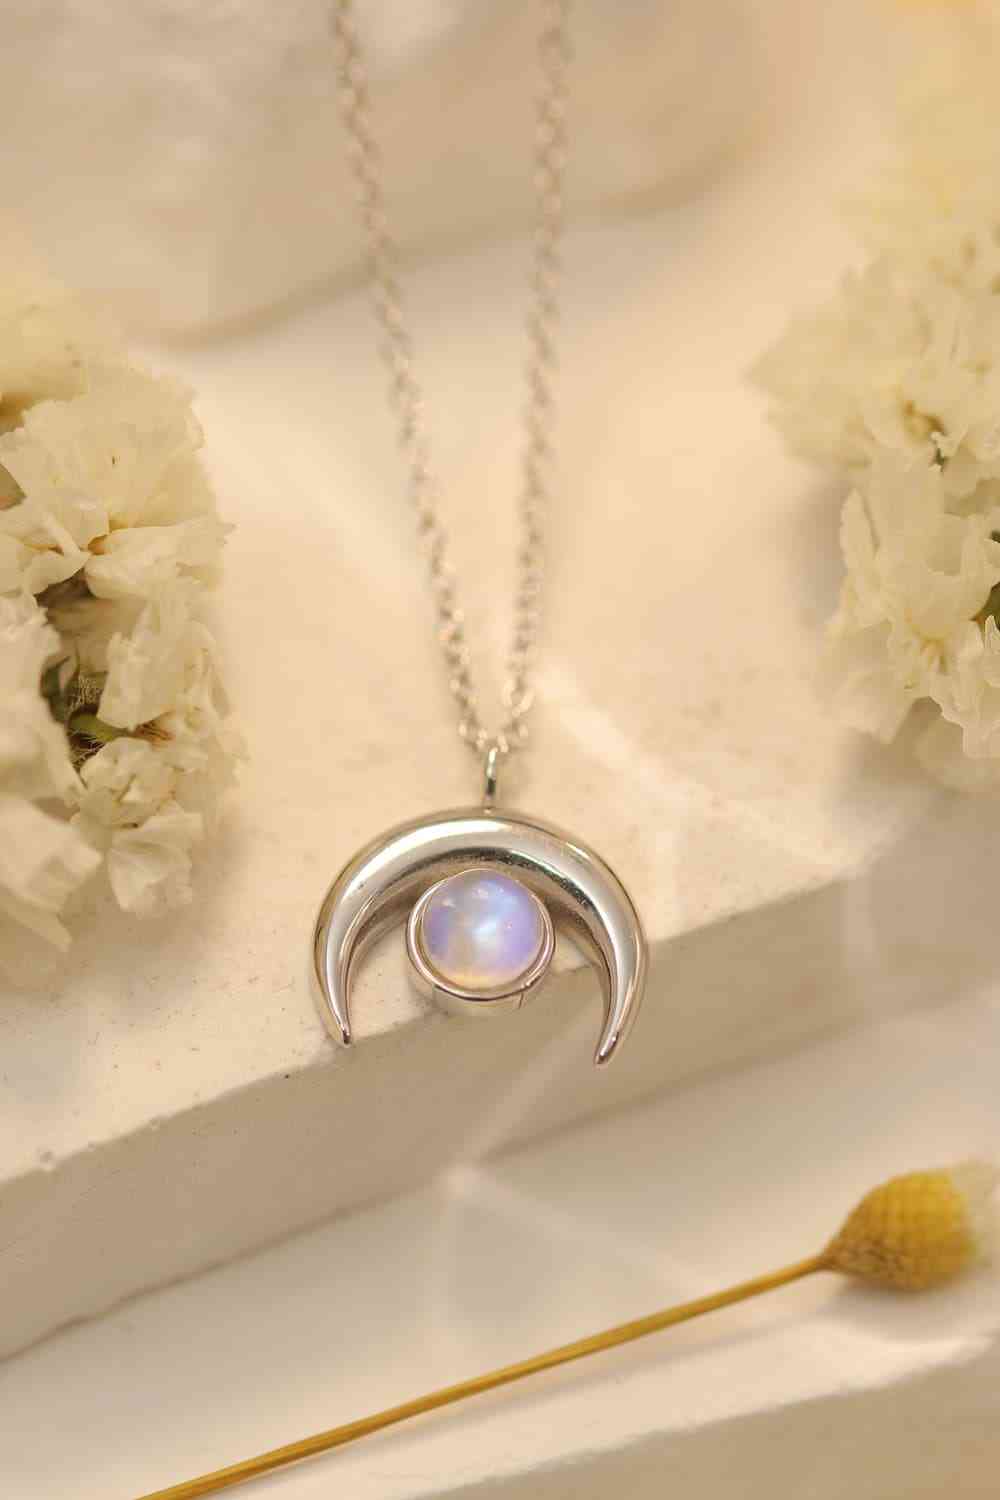 Moonstone Moon Pendant Necklace in 925 Sterling Silver - High Quality and Natural Accessory